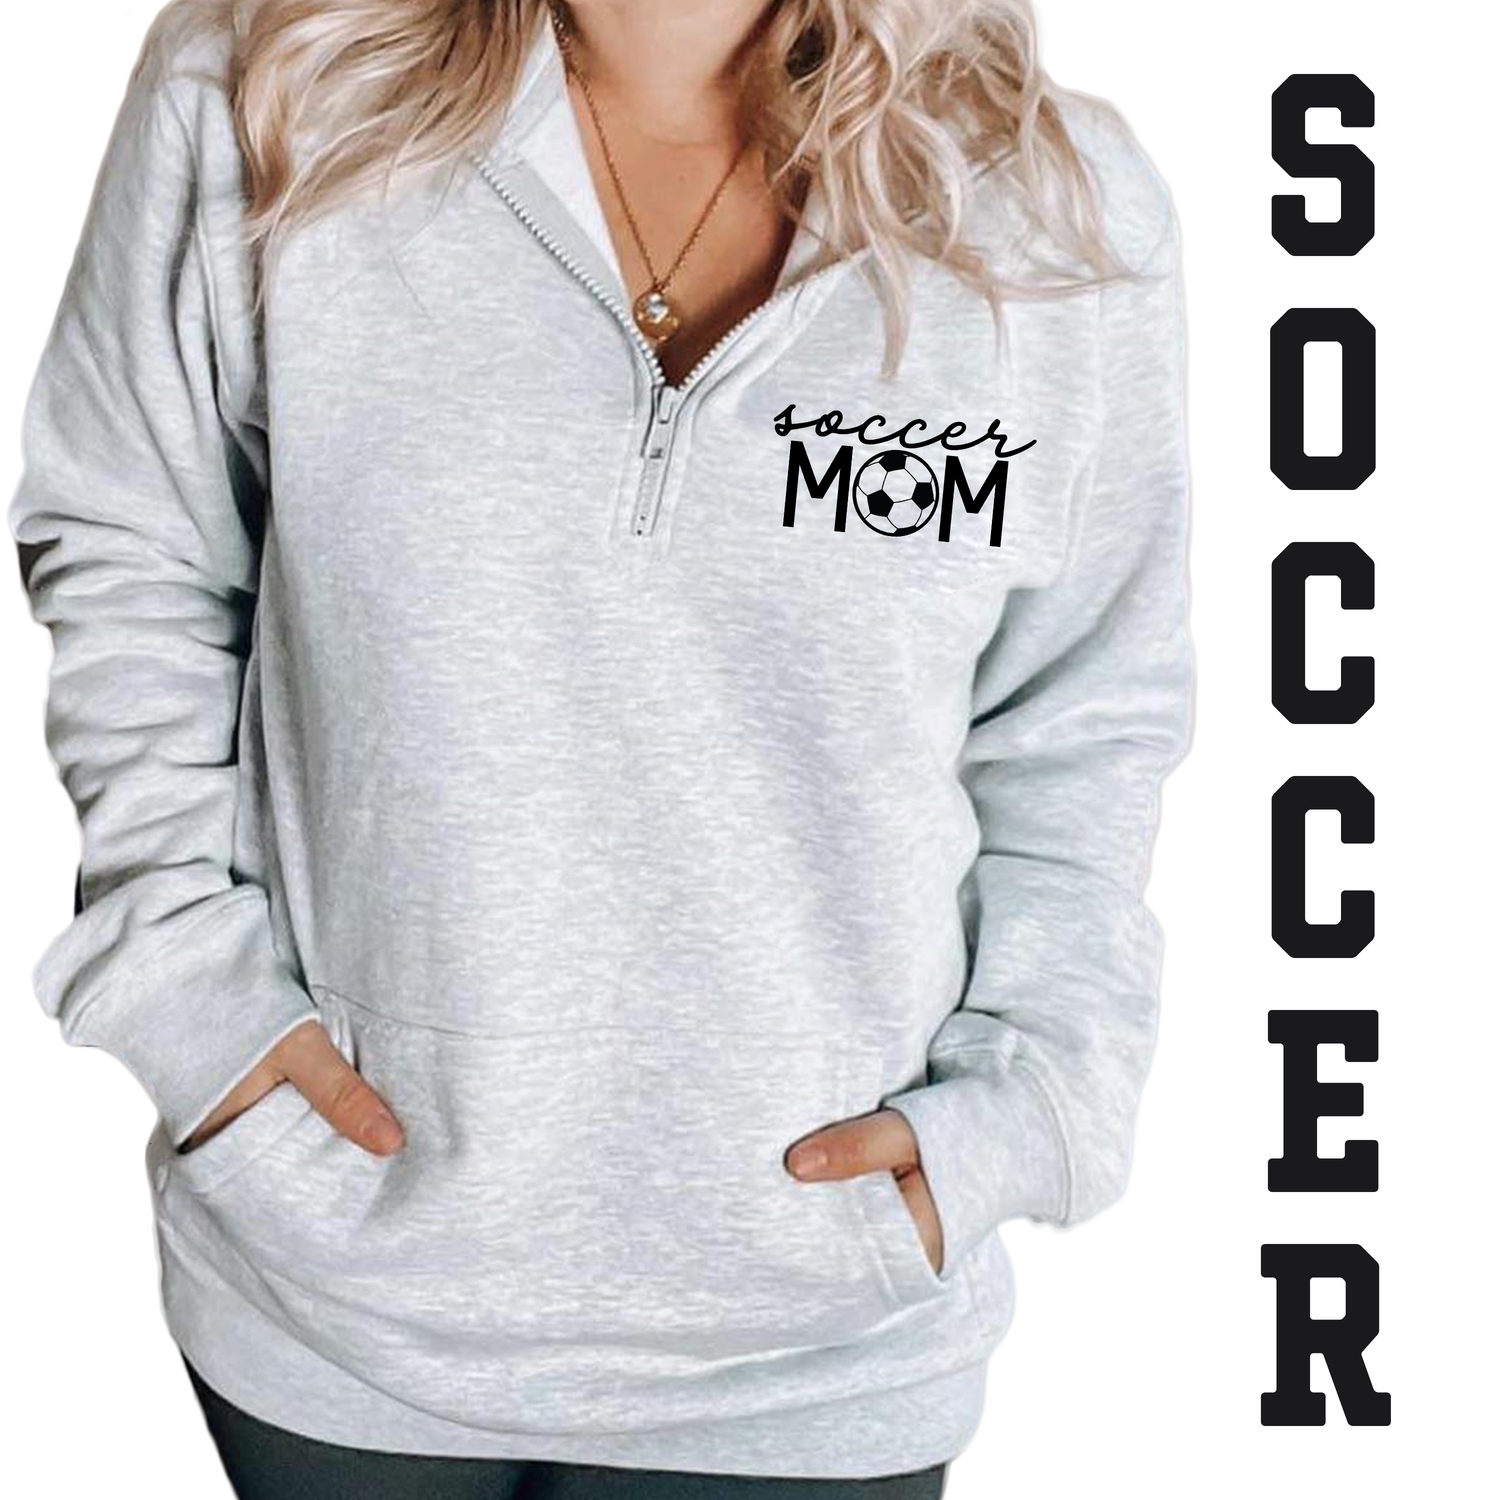 ADULT SOCCER MOM EIFC - 1/4 Zip with front Pouch Pocket